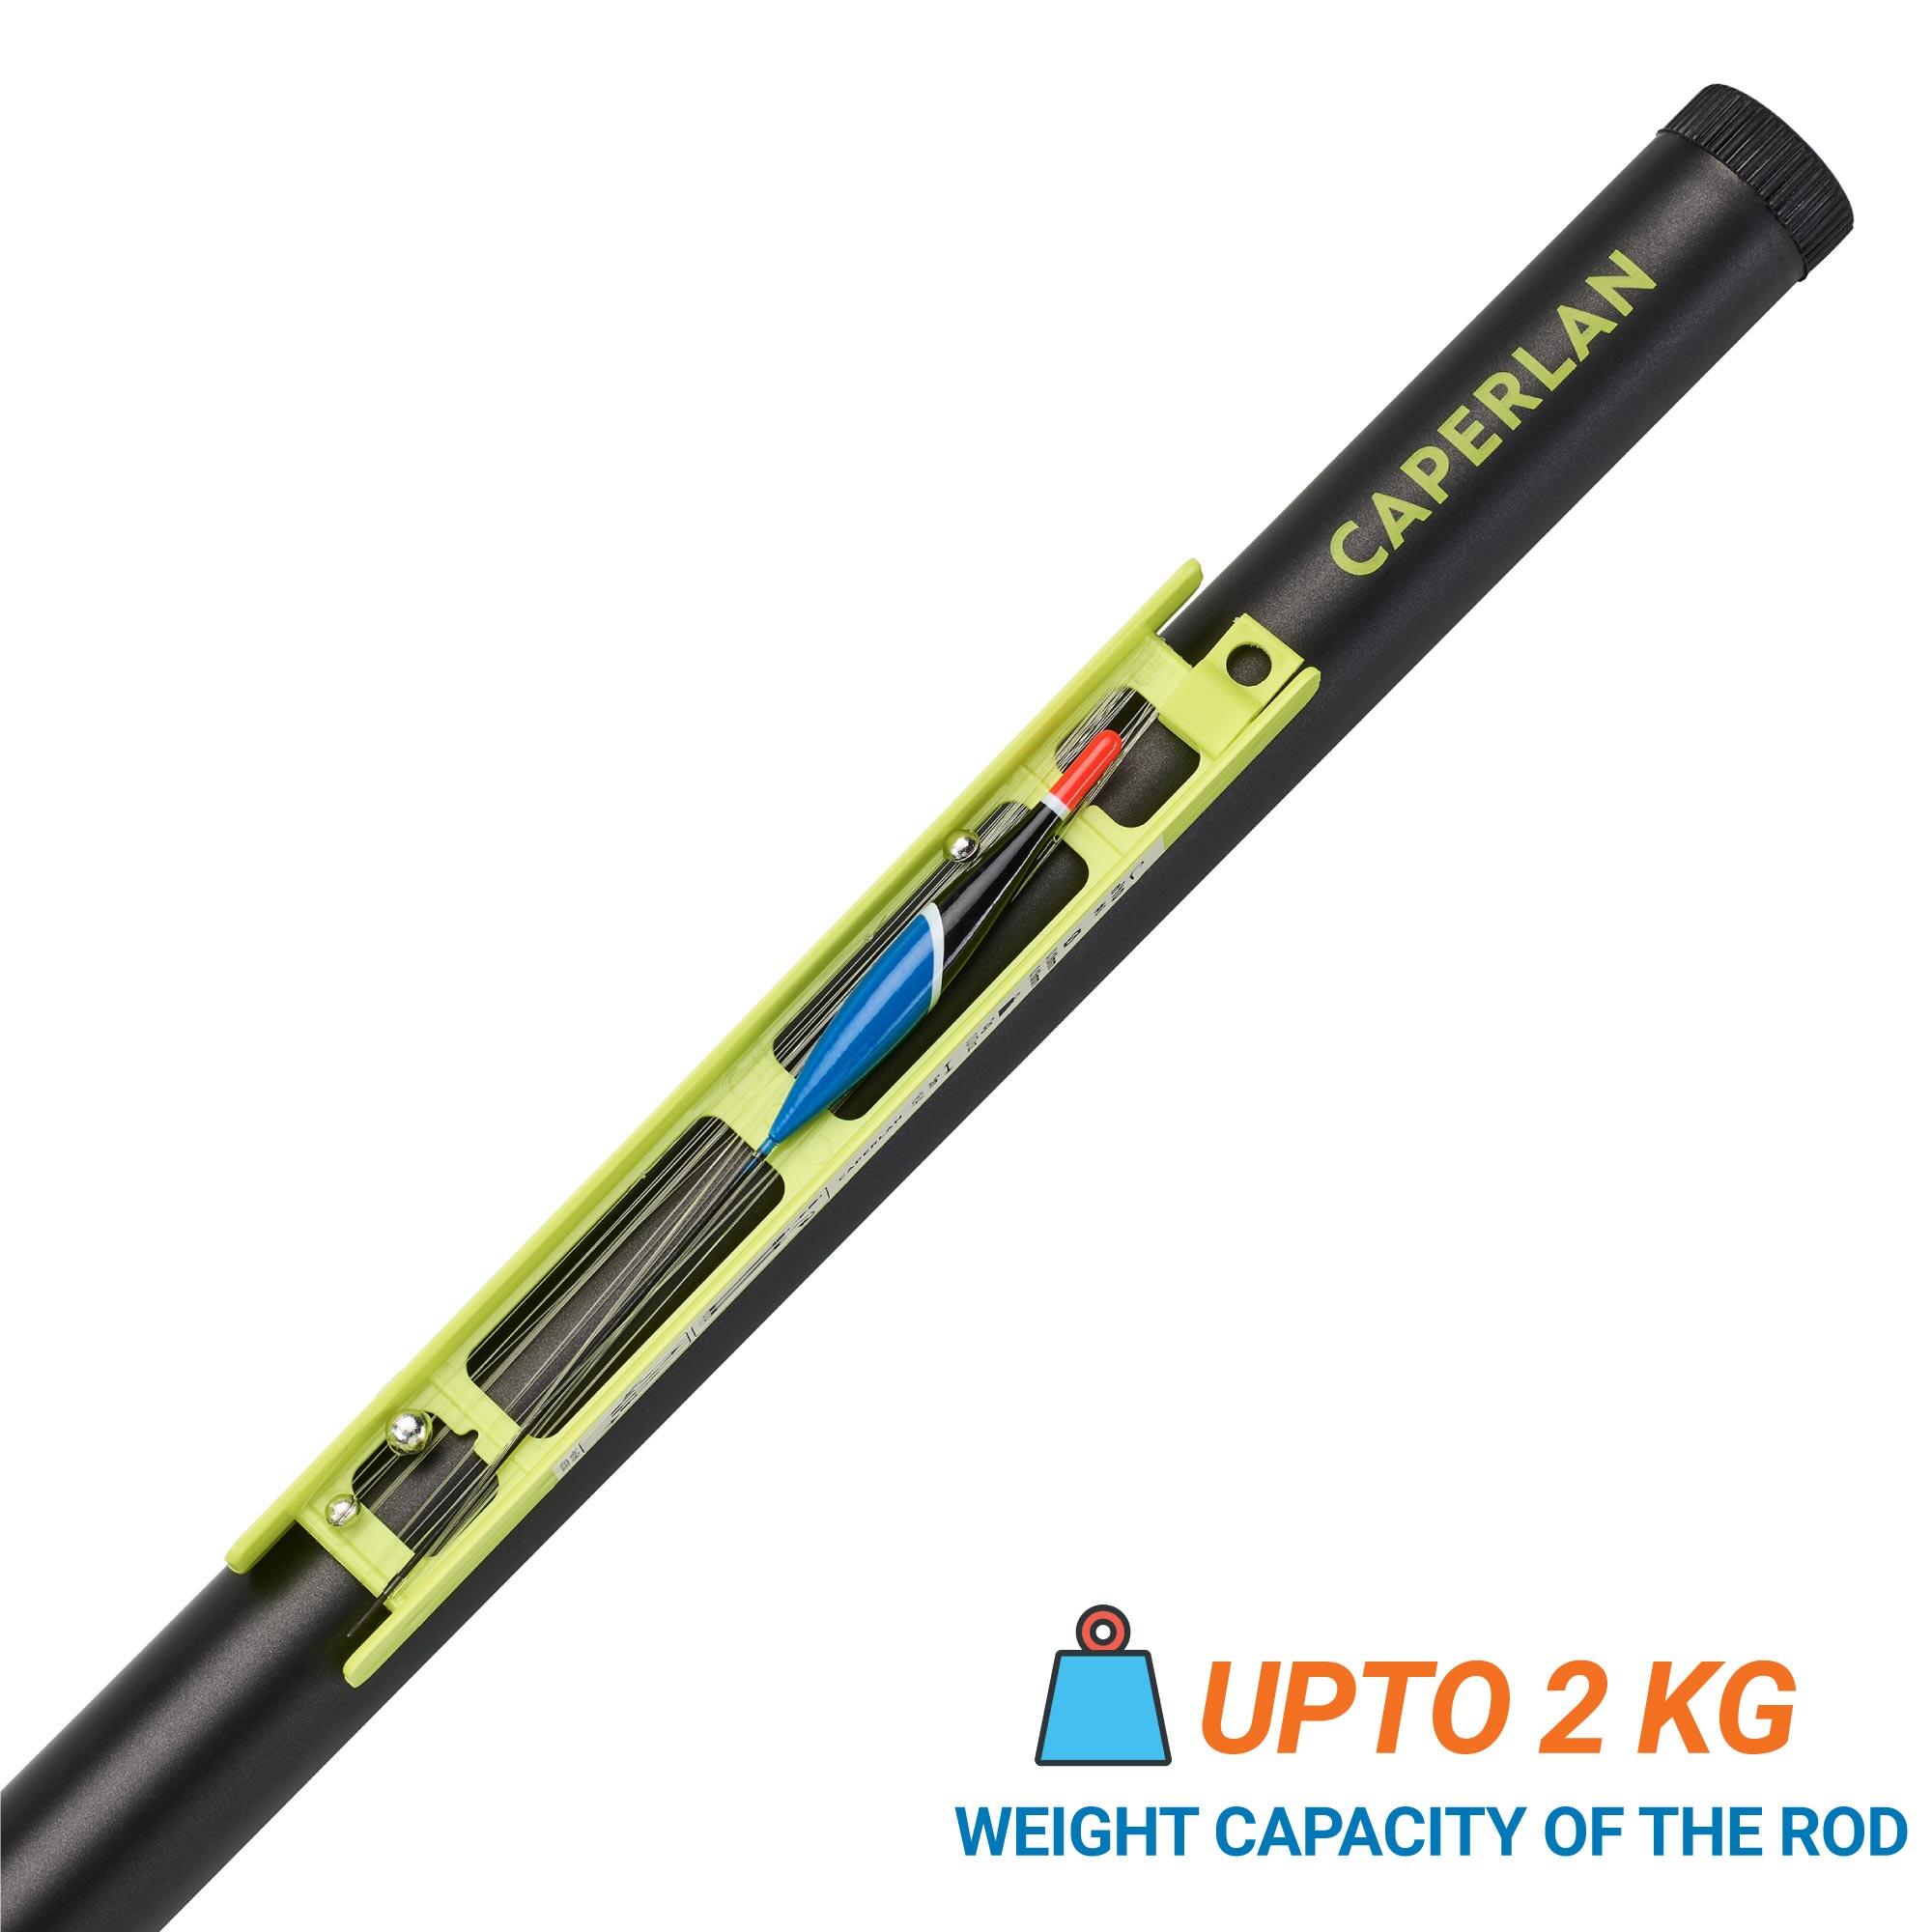 Fishing Rod 16ft Firstfish 500 Kit (Limited Edition) - One Size By CAPERLAN | Decathlon